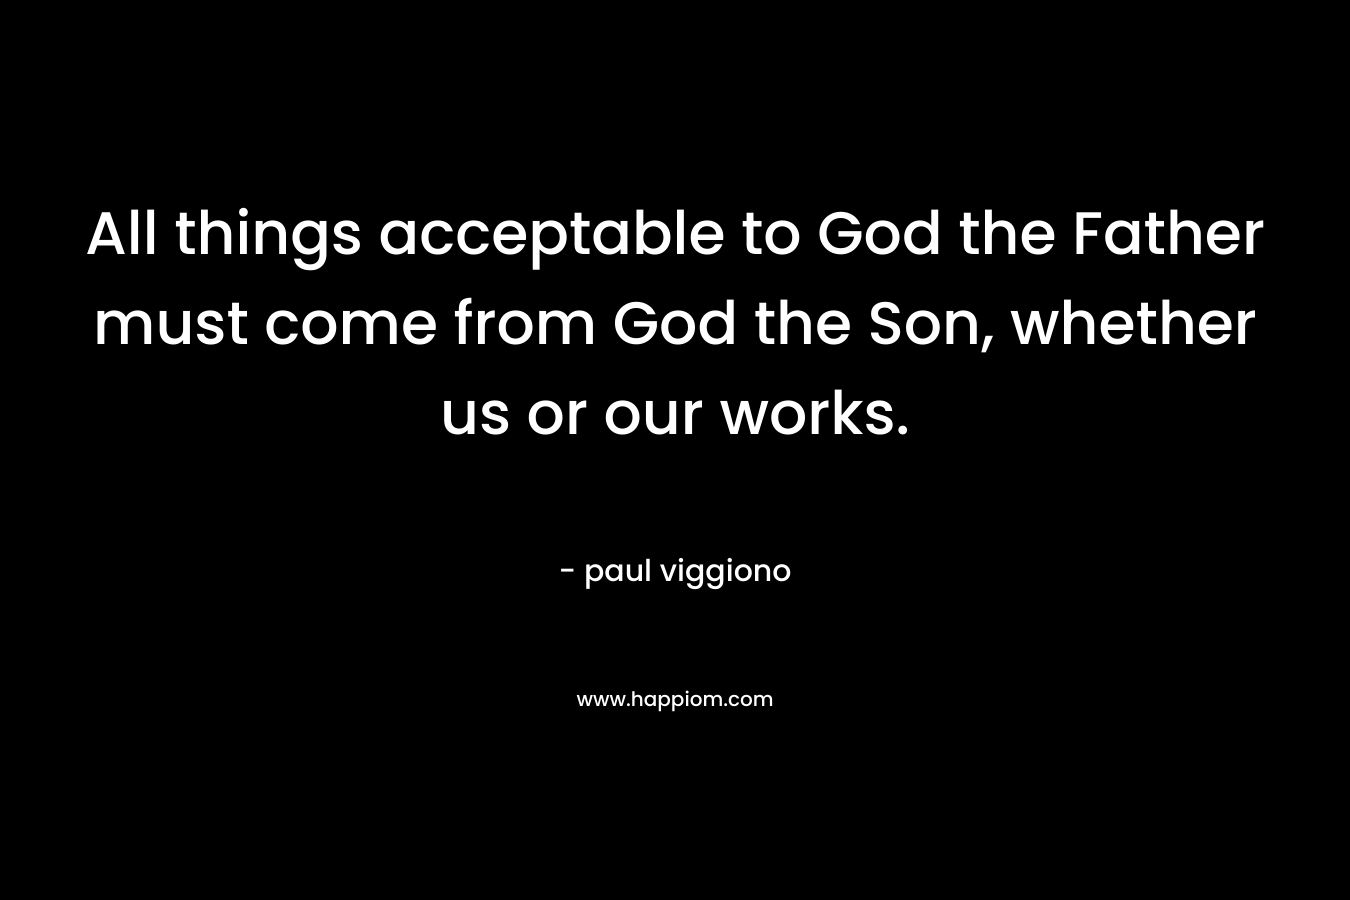 All things acceptable to God the Father must come from God the Son, whether us or our works. – paul viggiono